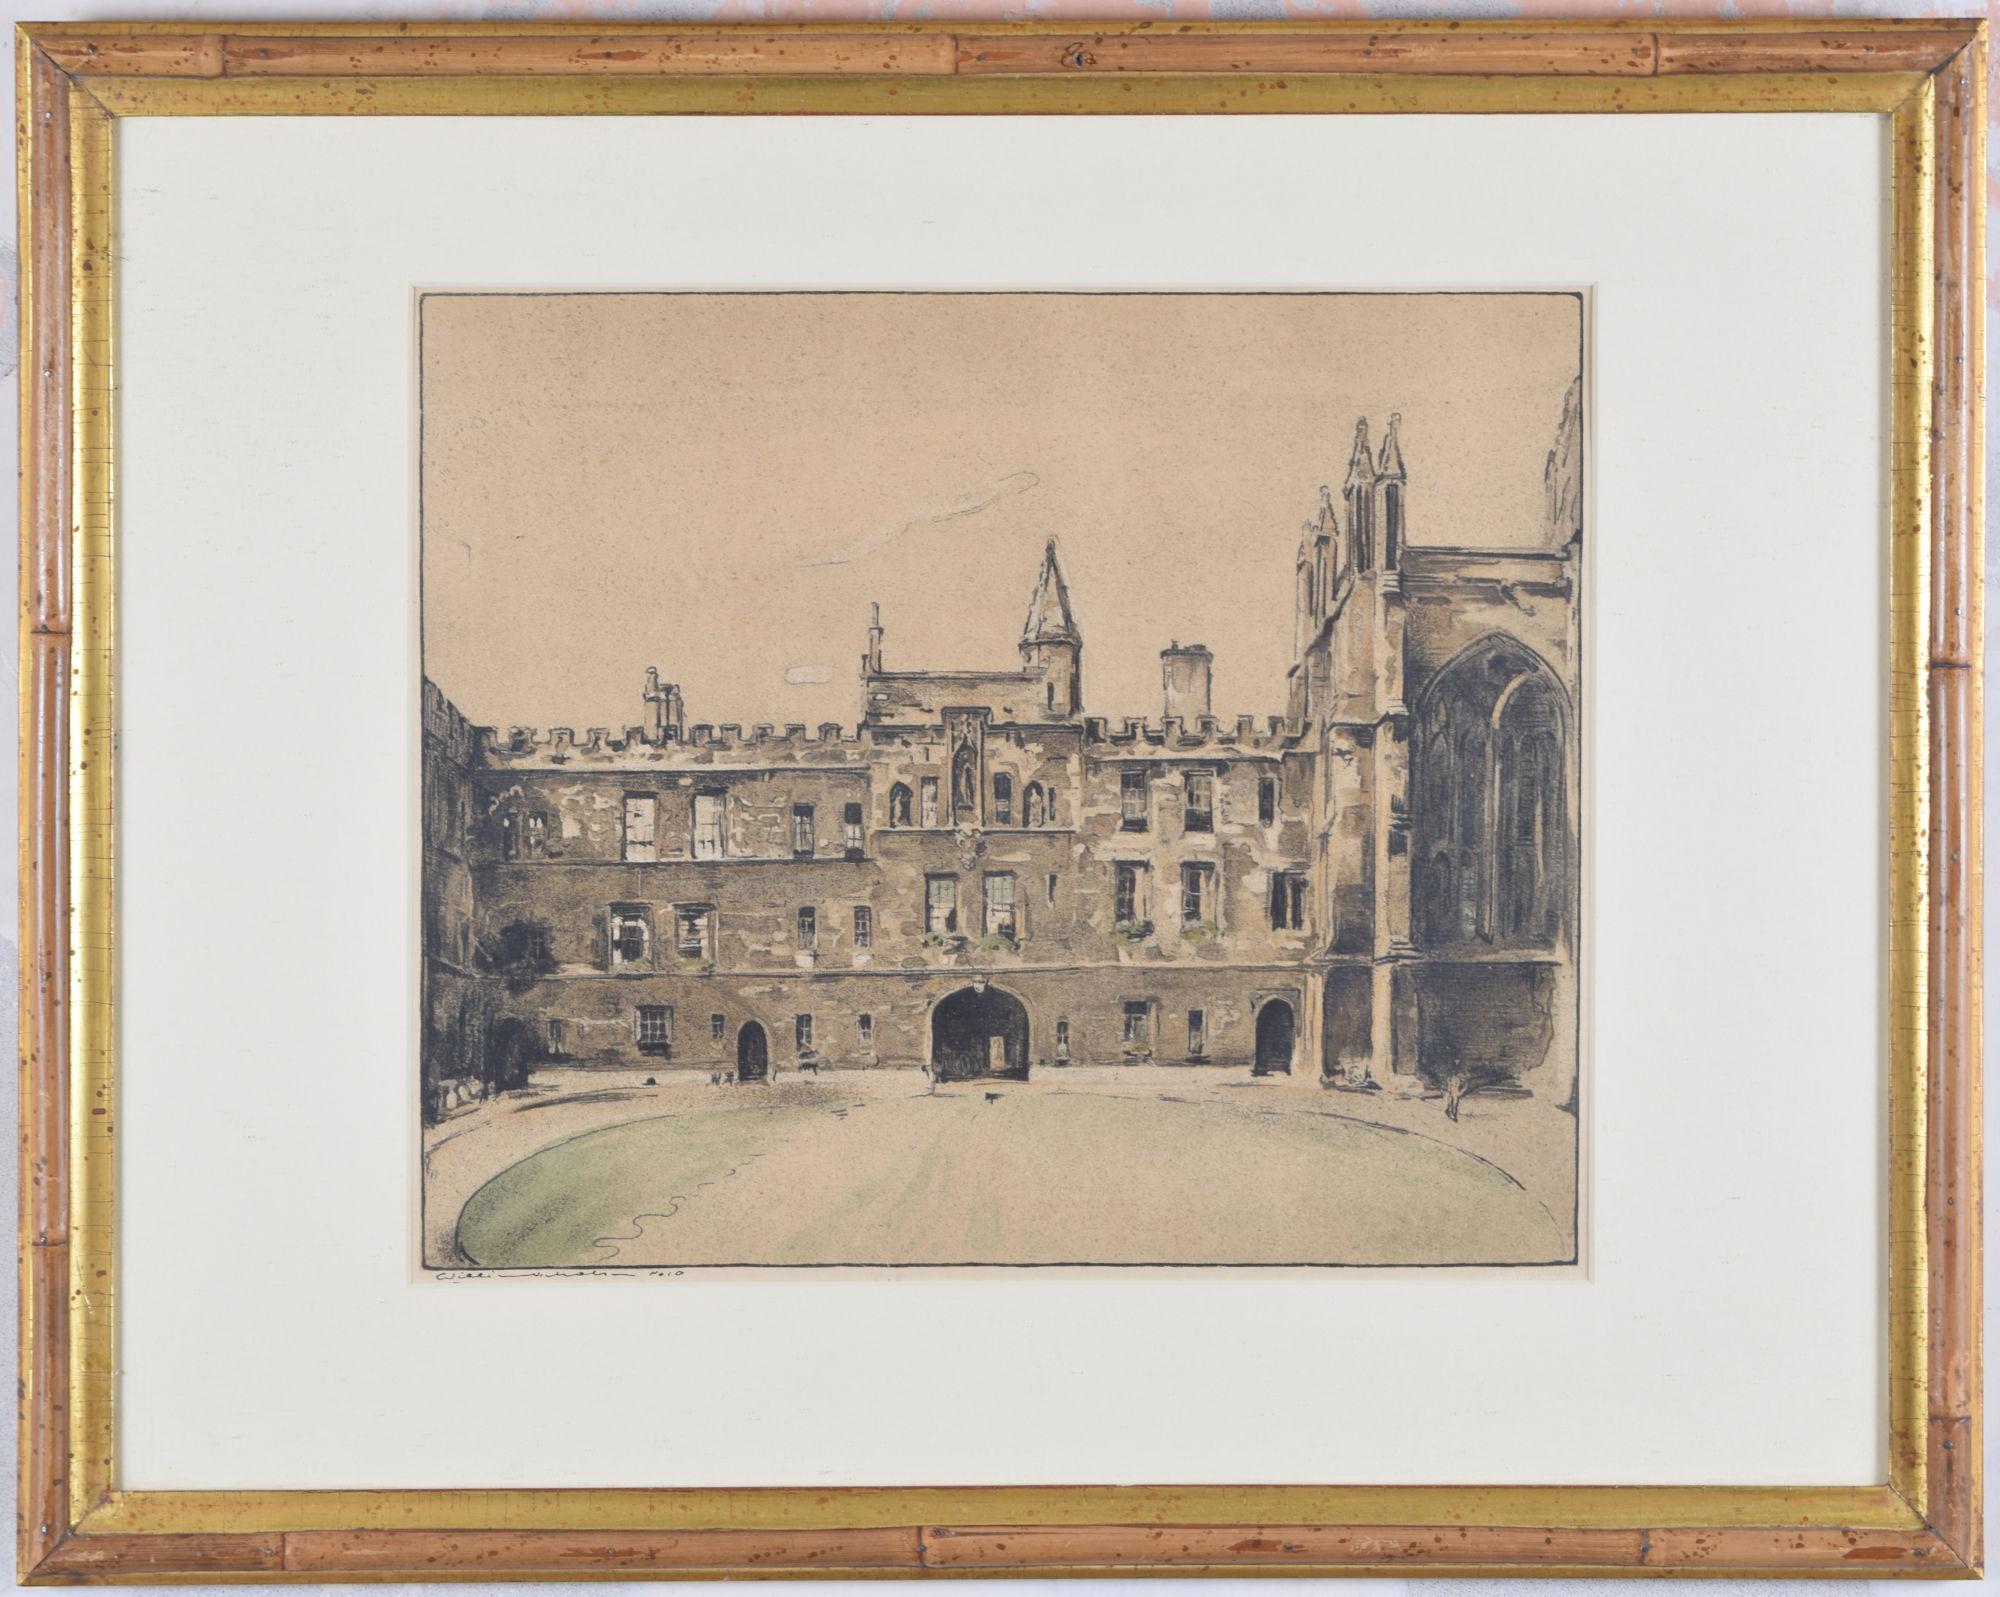 To see our other views of Oxford and Cambridge, scroll down to "More from this Seller" and below it click on "See all from this Seller" - or send us a message if you cannot find the view you want.

William Nicholson (1872 - 1949)
New College,